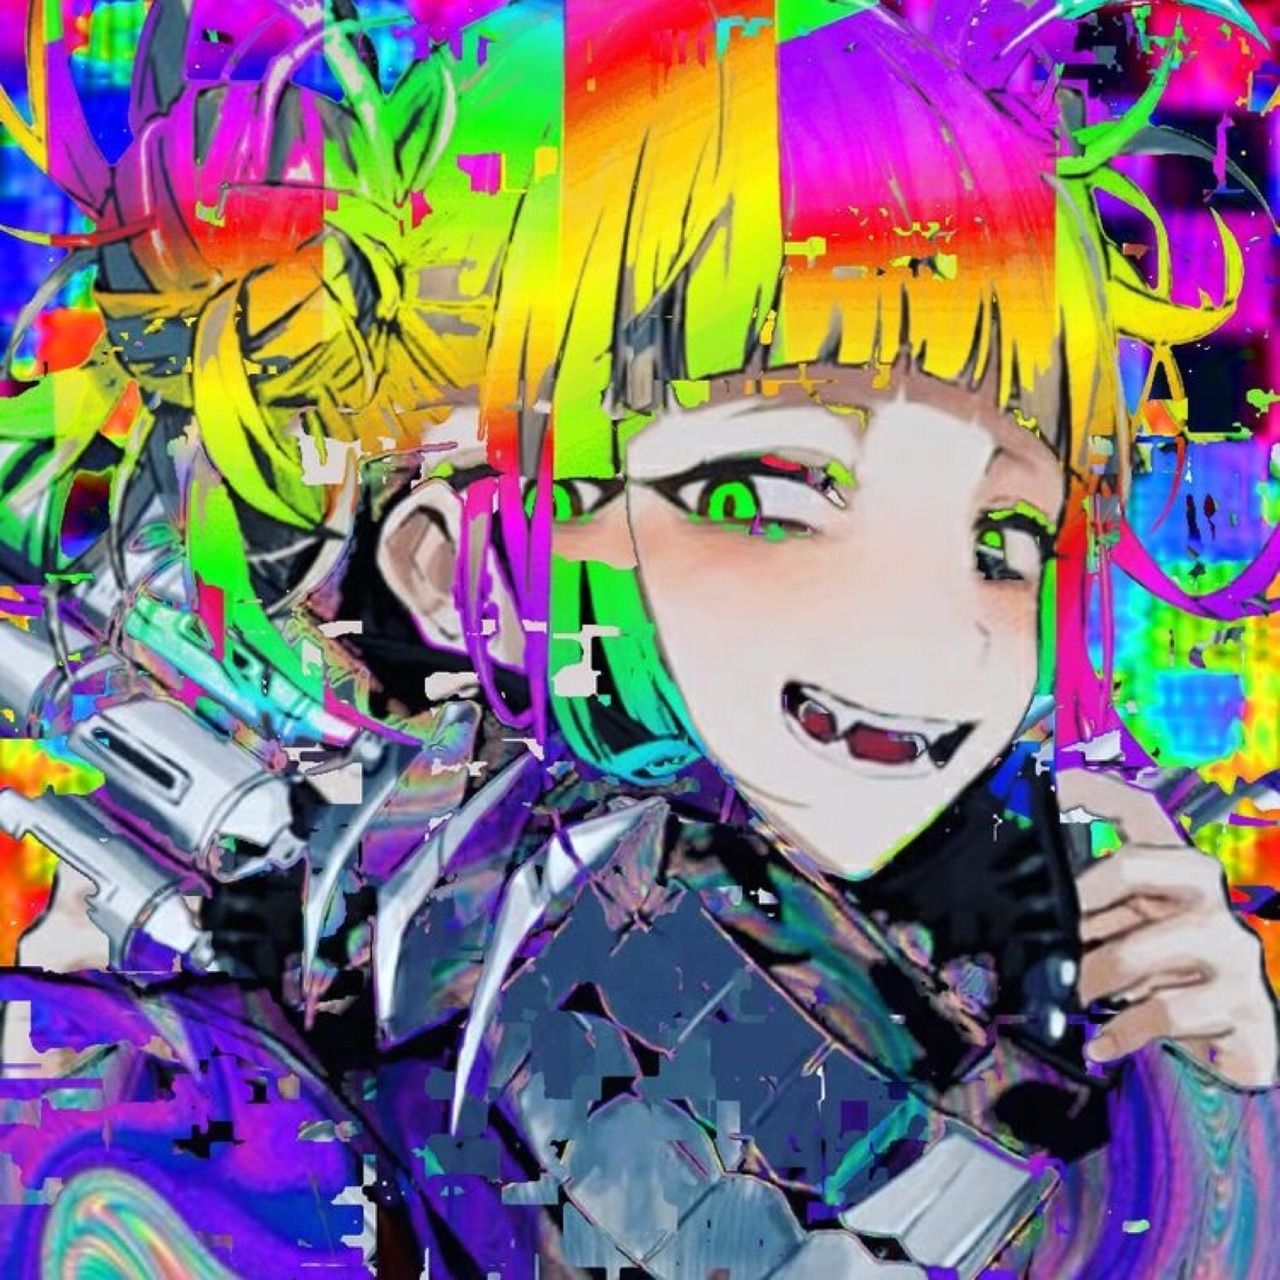 Anime Glitchcore Wallpapers - Wallpaper Cave